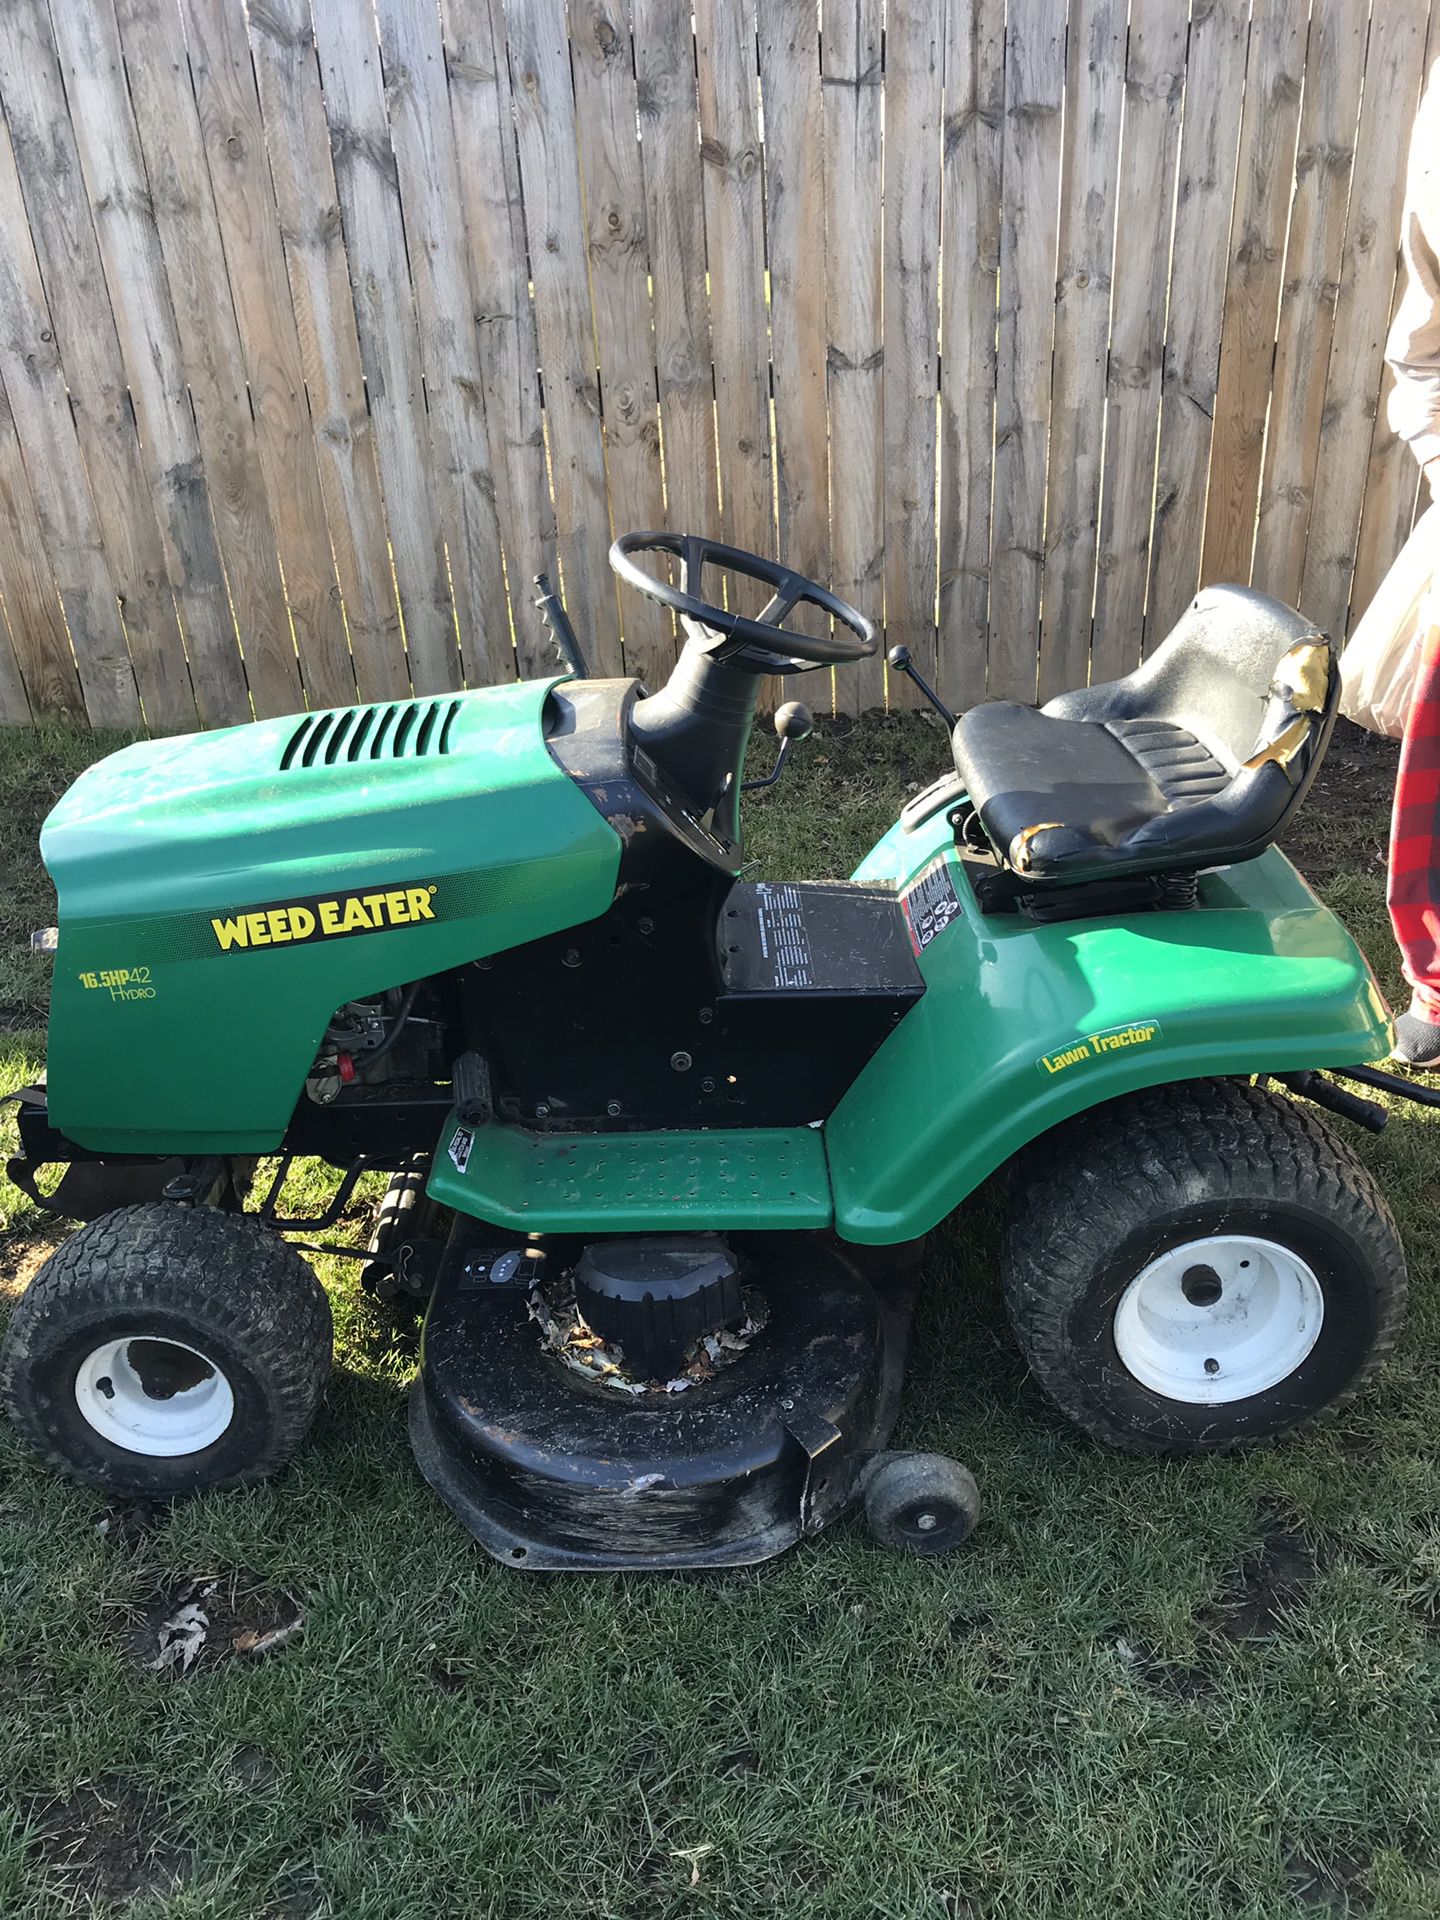 42” Weed Eater Riding Lawn Mower with Cart